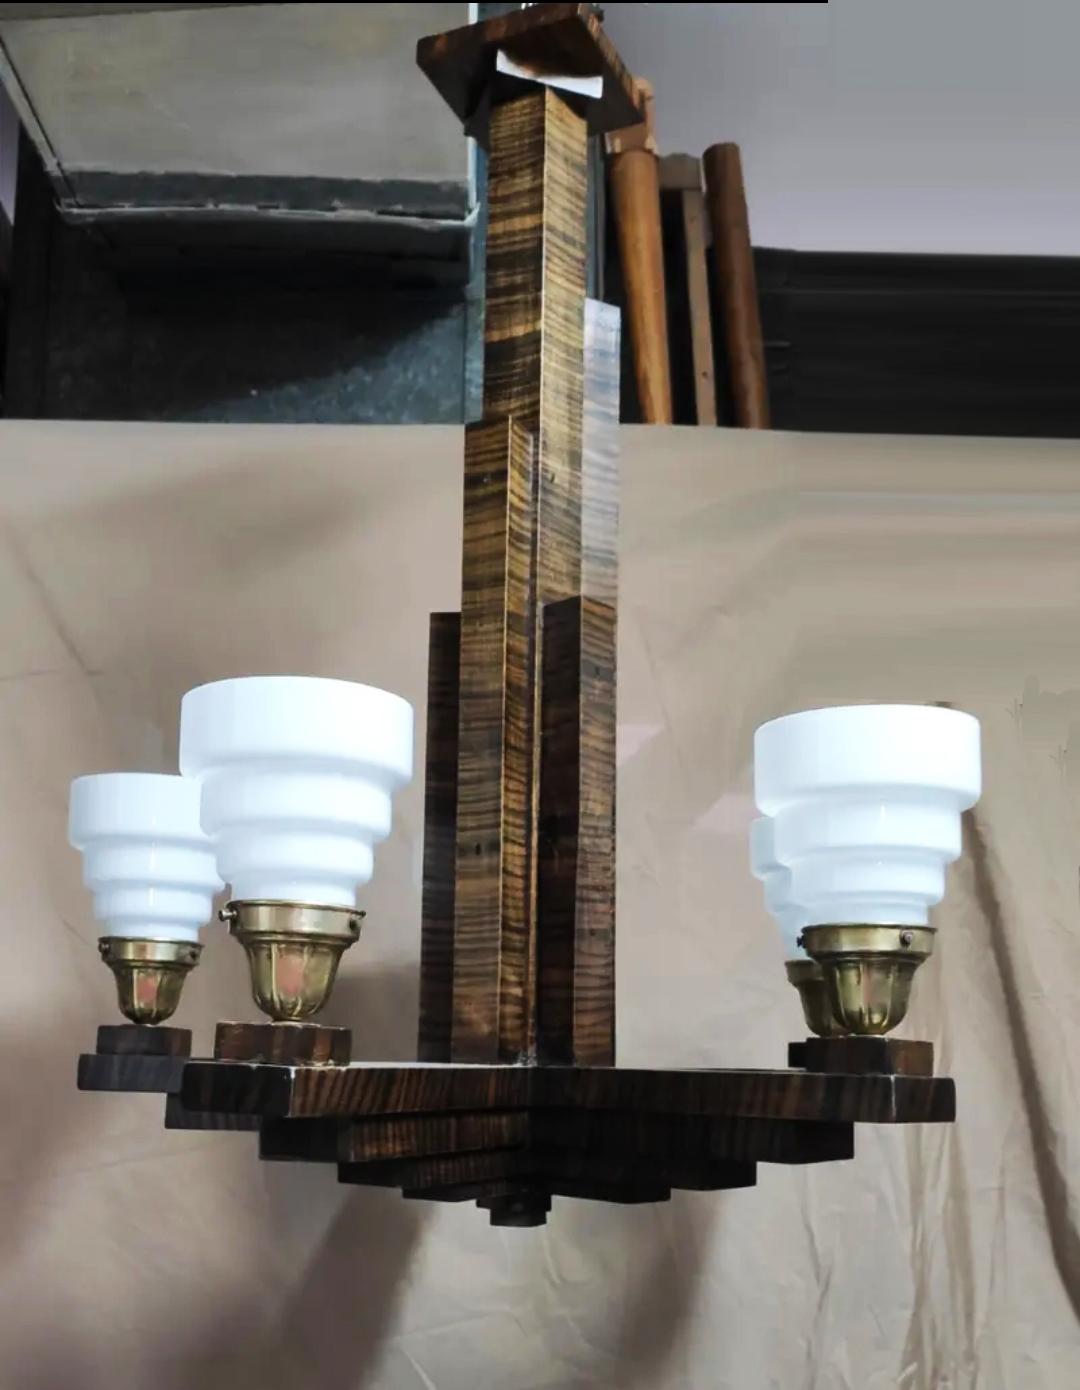 Spectacular amd expceptional  lamp in the purest Art Deco Skyscraper style, 1930s.

 Wood  Madagascar ebony Coromandel or similar, with tulips
Brass and opaline glass

Lamp created at the beginning of the 20th century, when man struggled to reach